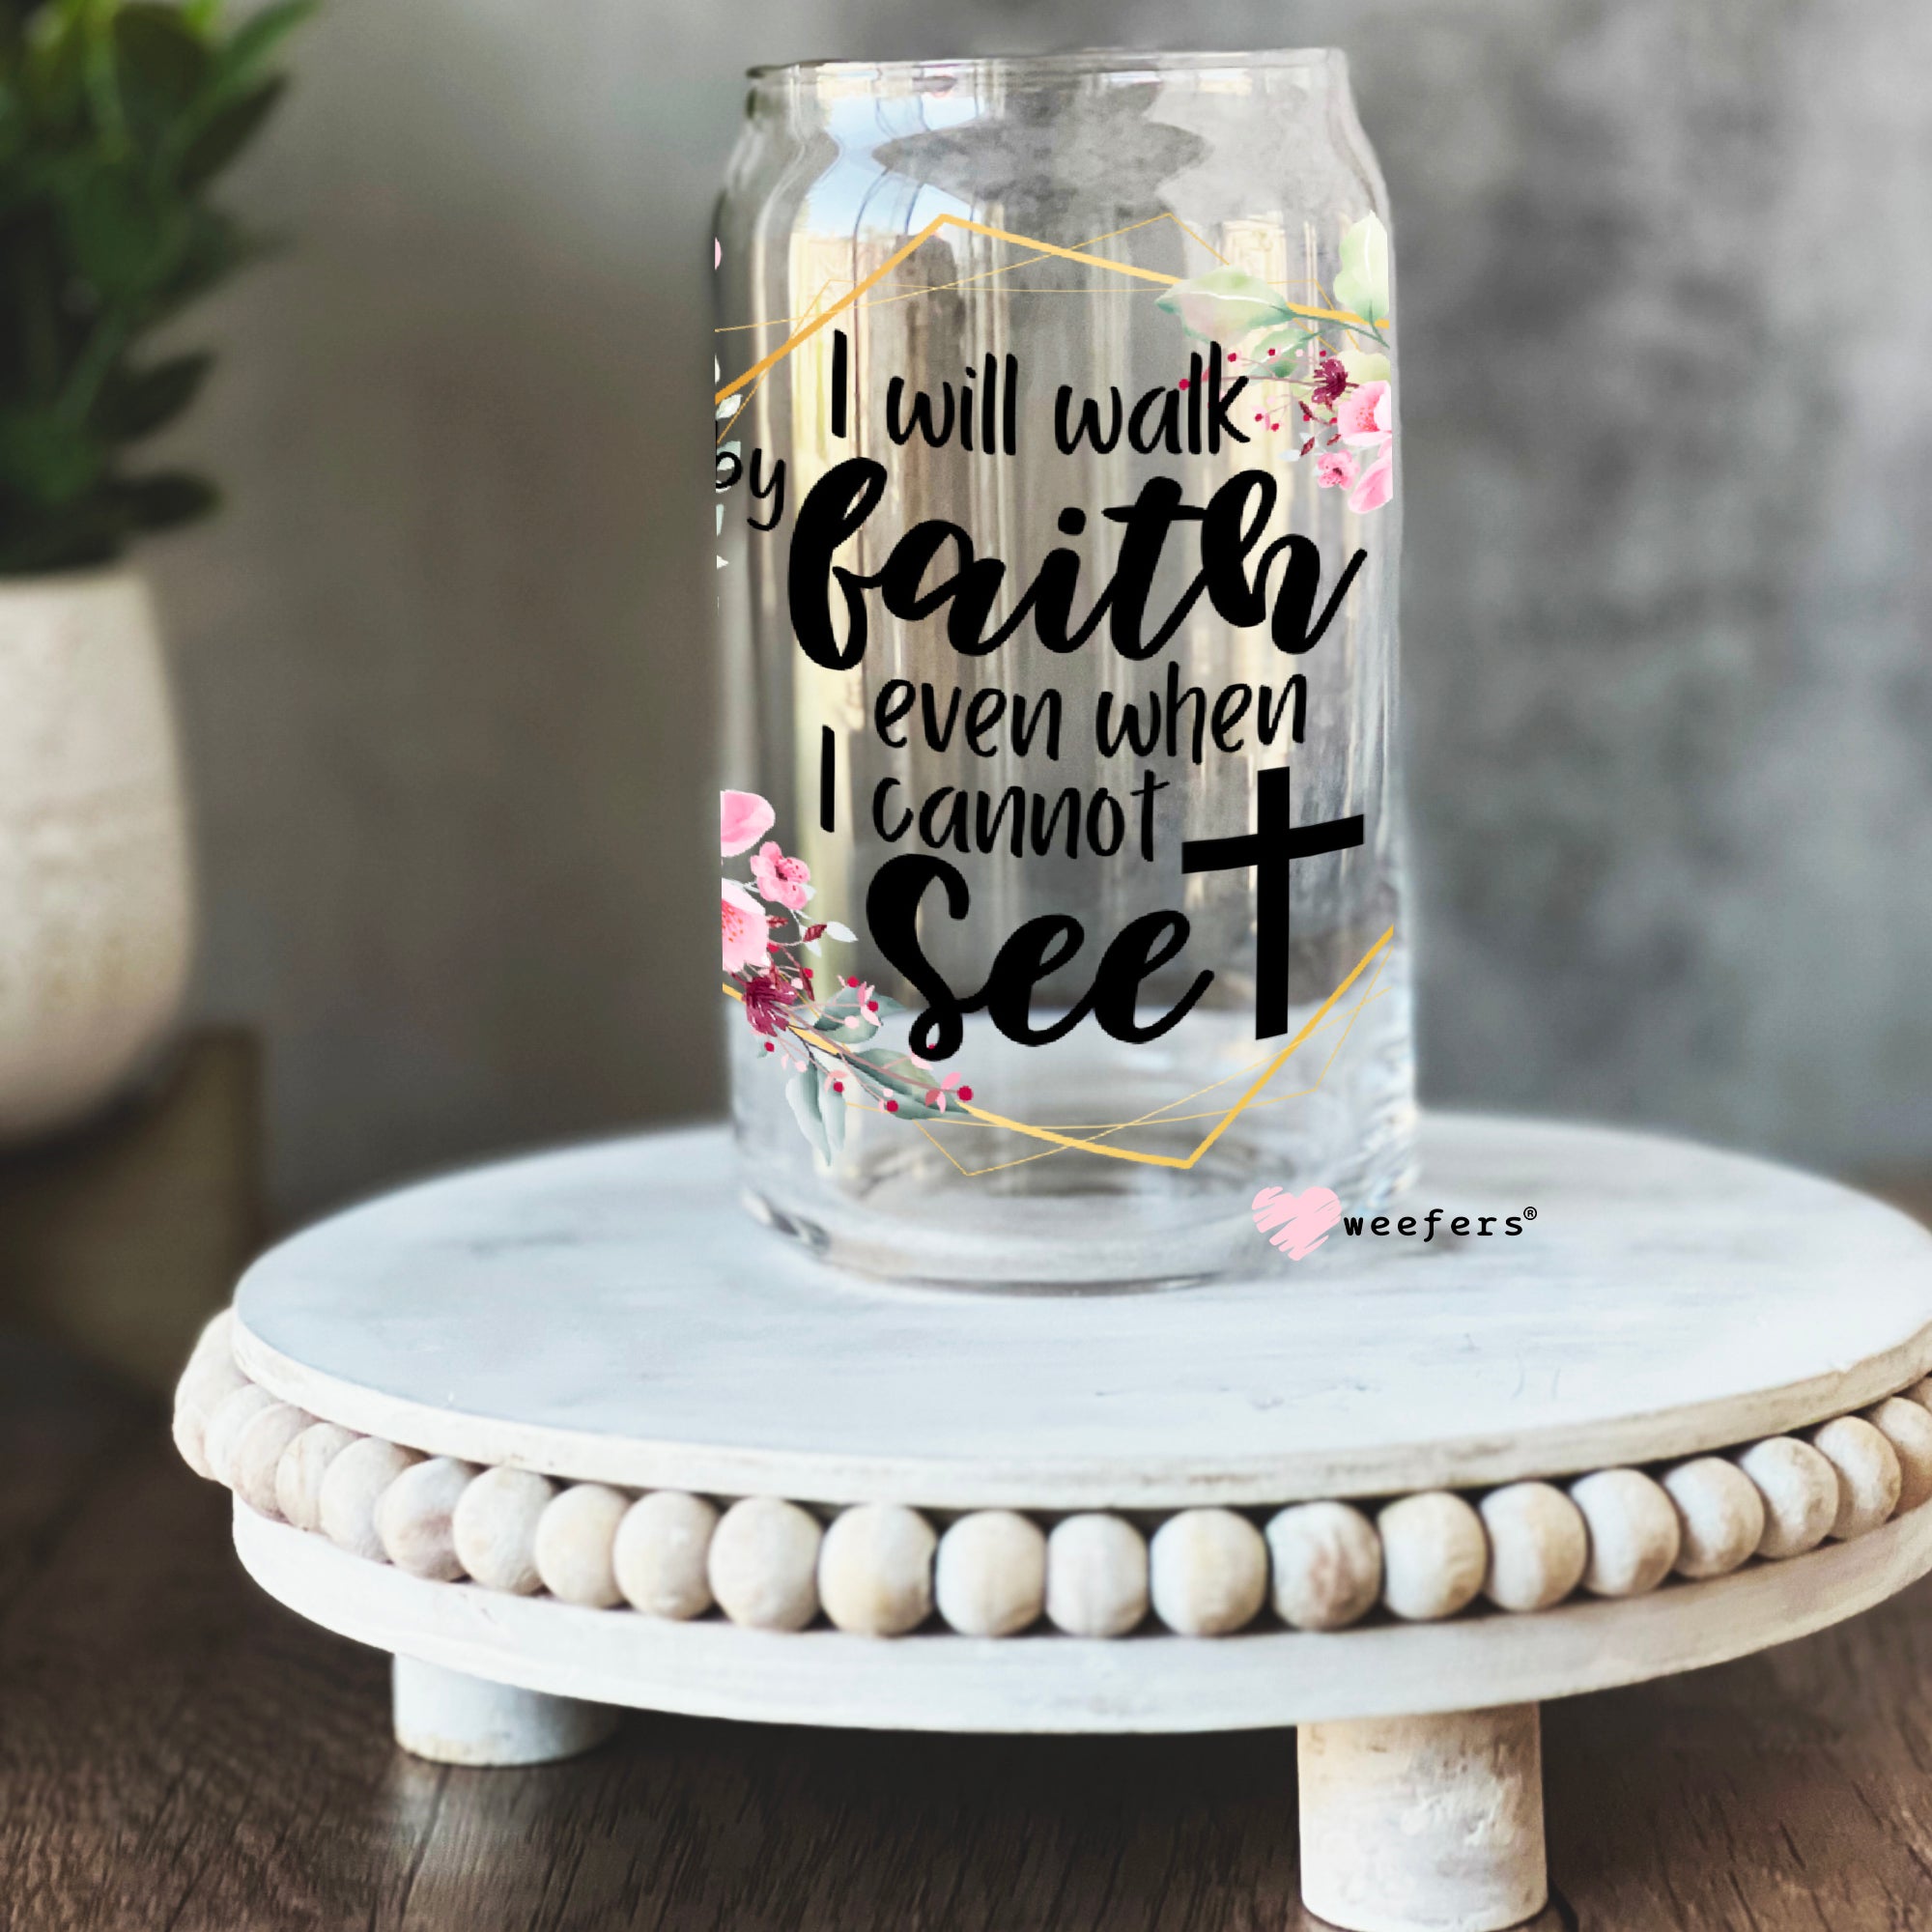 Faith Coffee Cup - Iced Coffee Glass with Minimalist Design - Christian Gifts for Her - Christian Tumbler - Smoothie Cup 16oz from BluChi